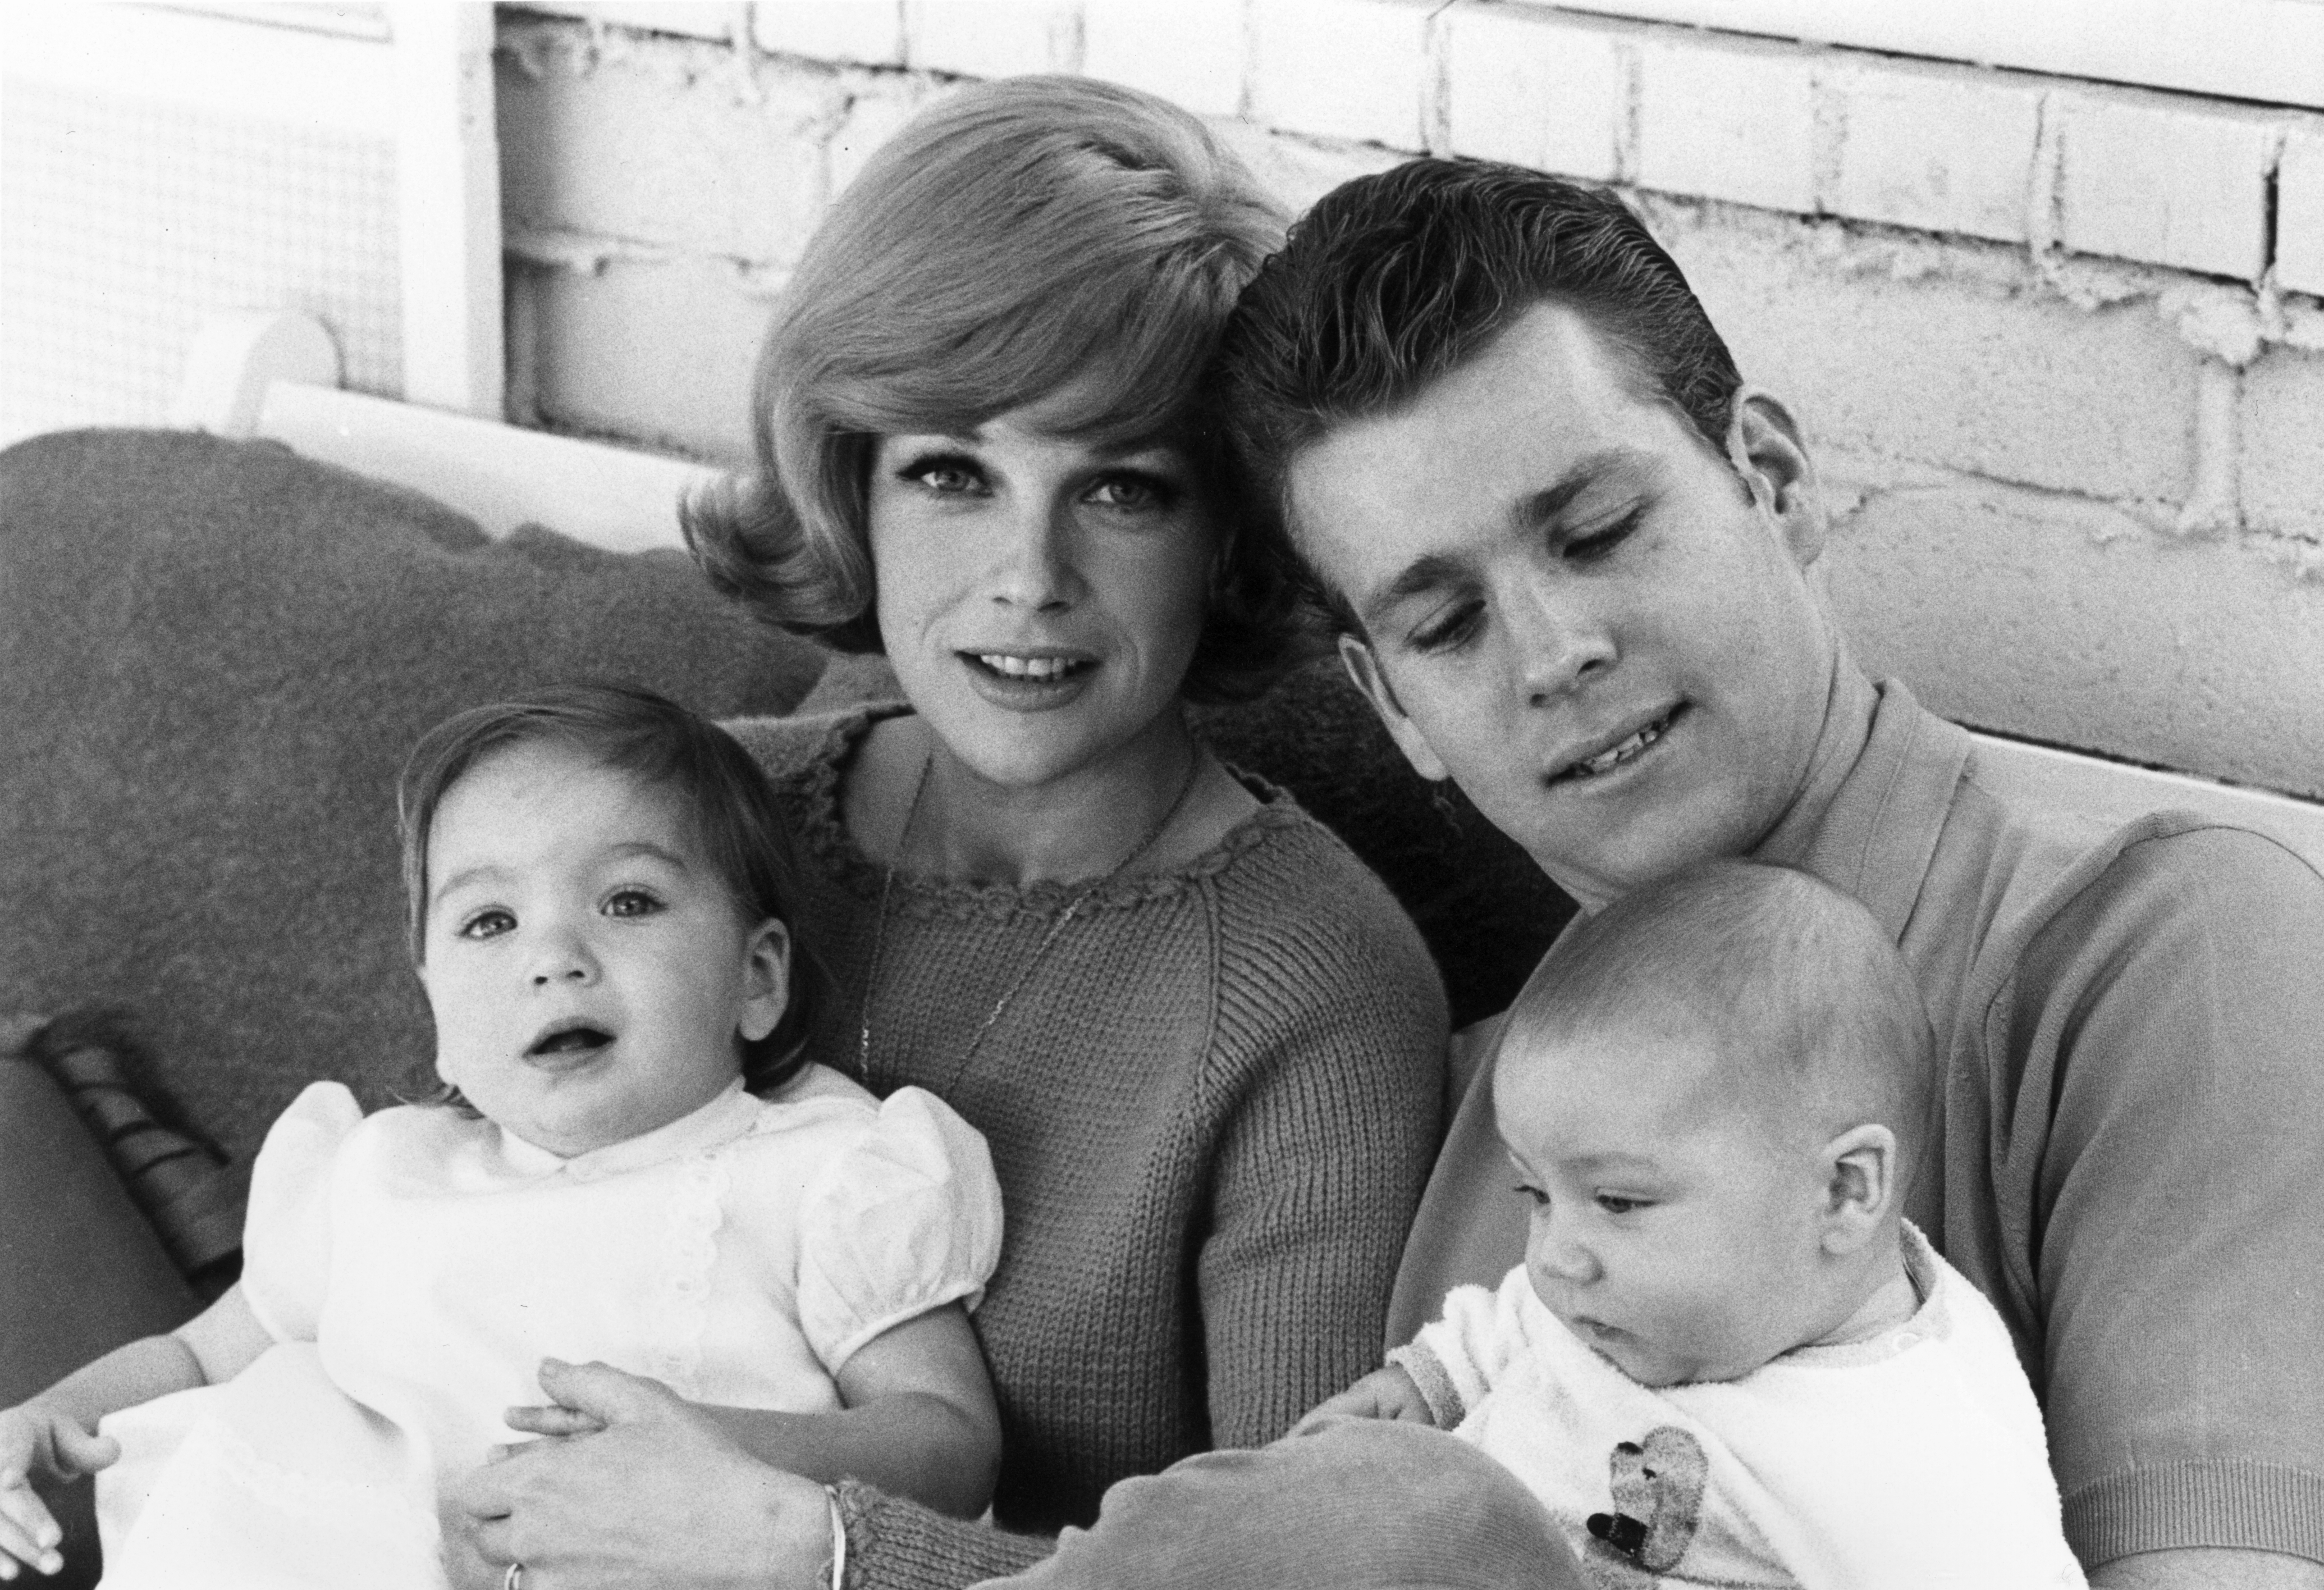 Ryan O'Neal seated with his son, Griffin, and Joanna Moore has their daughter, Tatum, on her lap, circa 1965.| Source: Getty Images